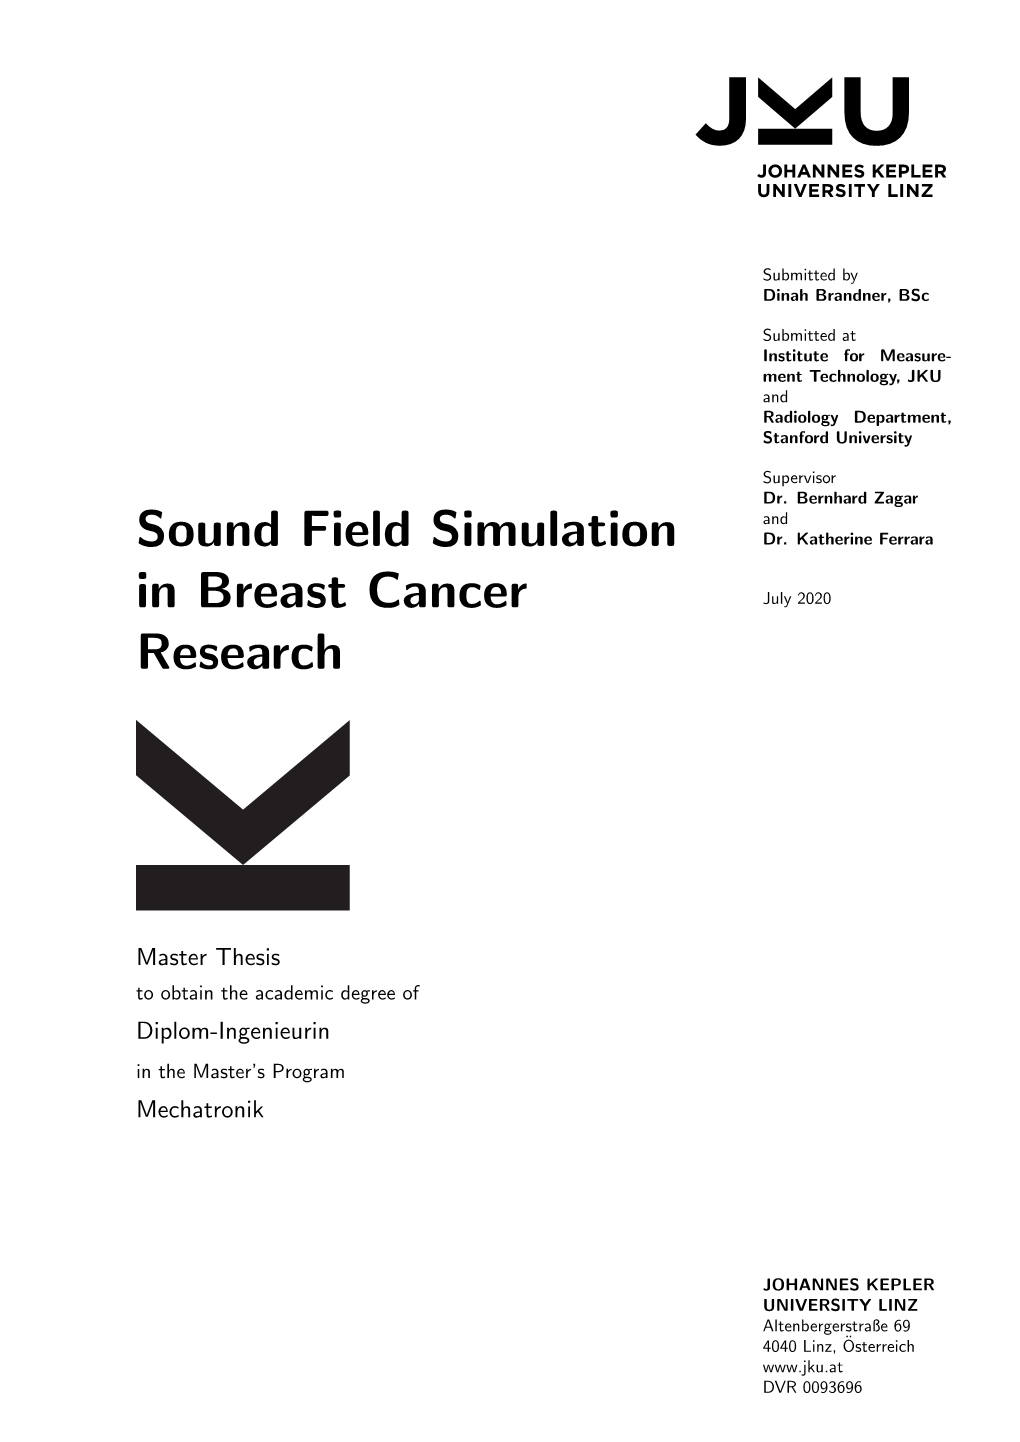 Sound Field Simulation in Breast Cancer Research